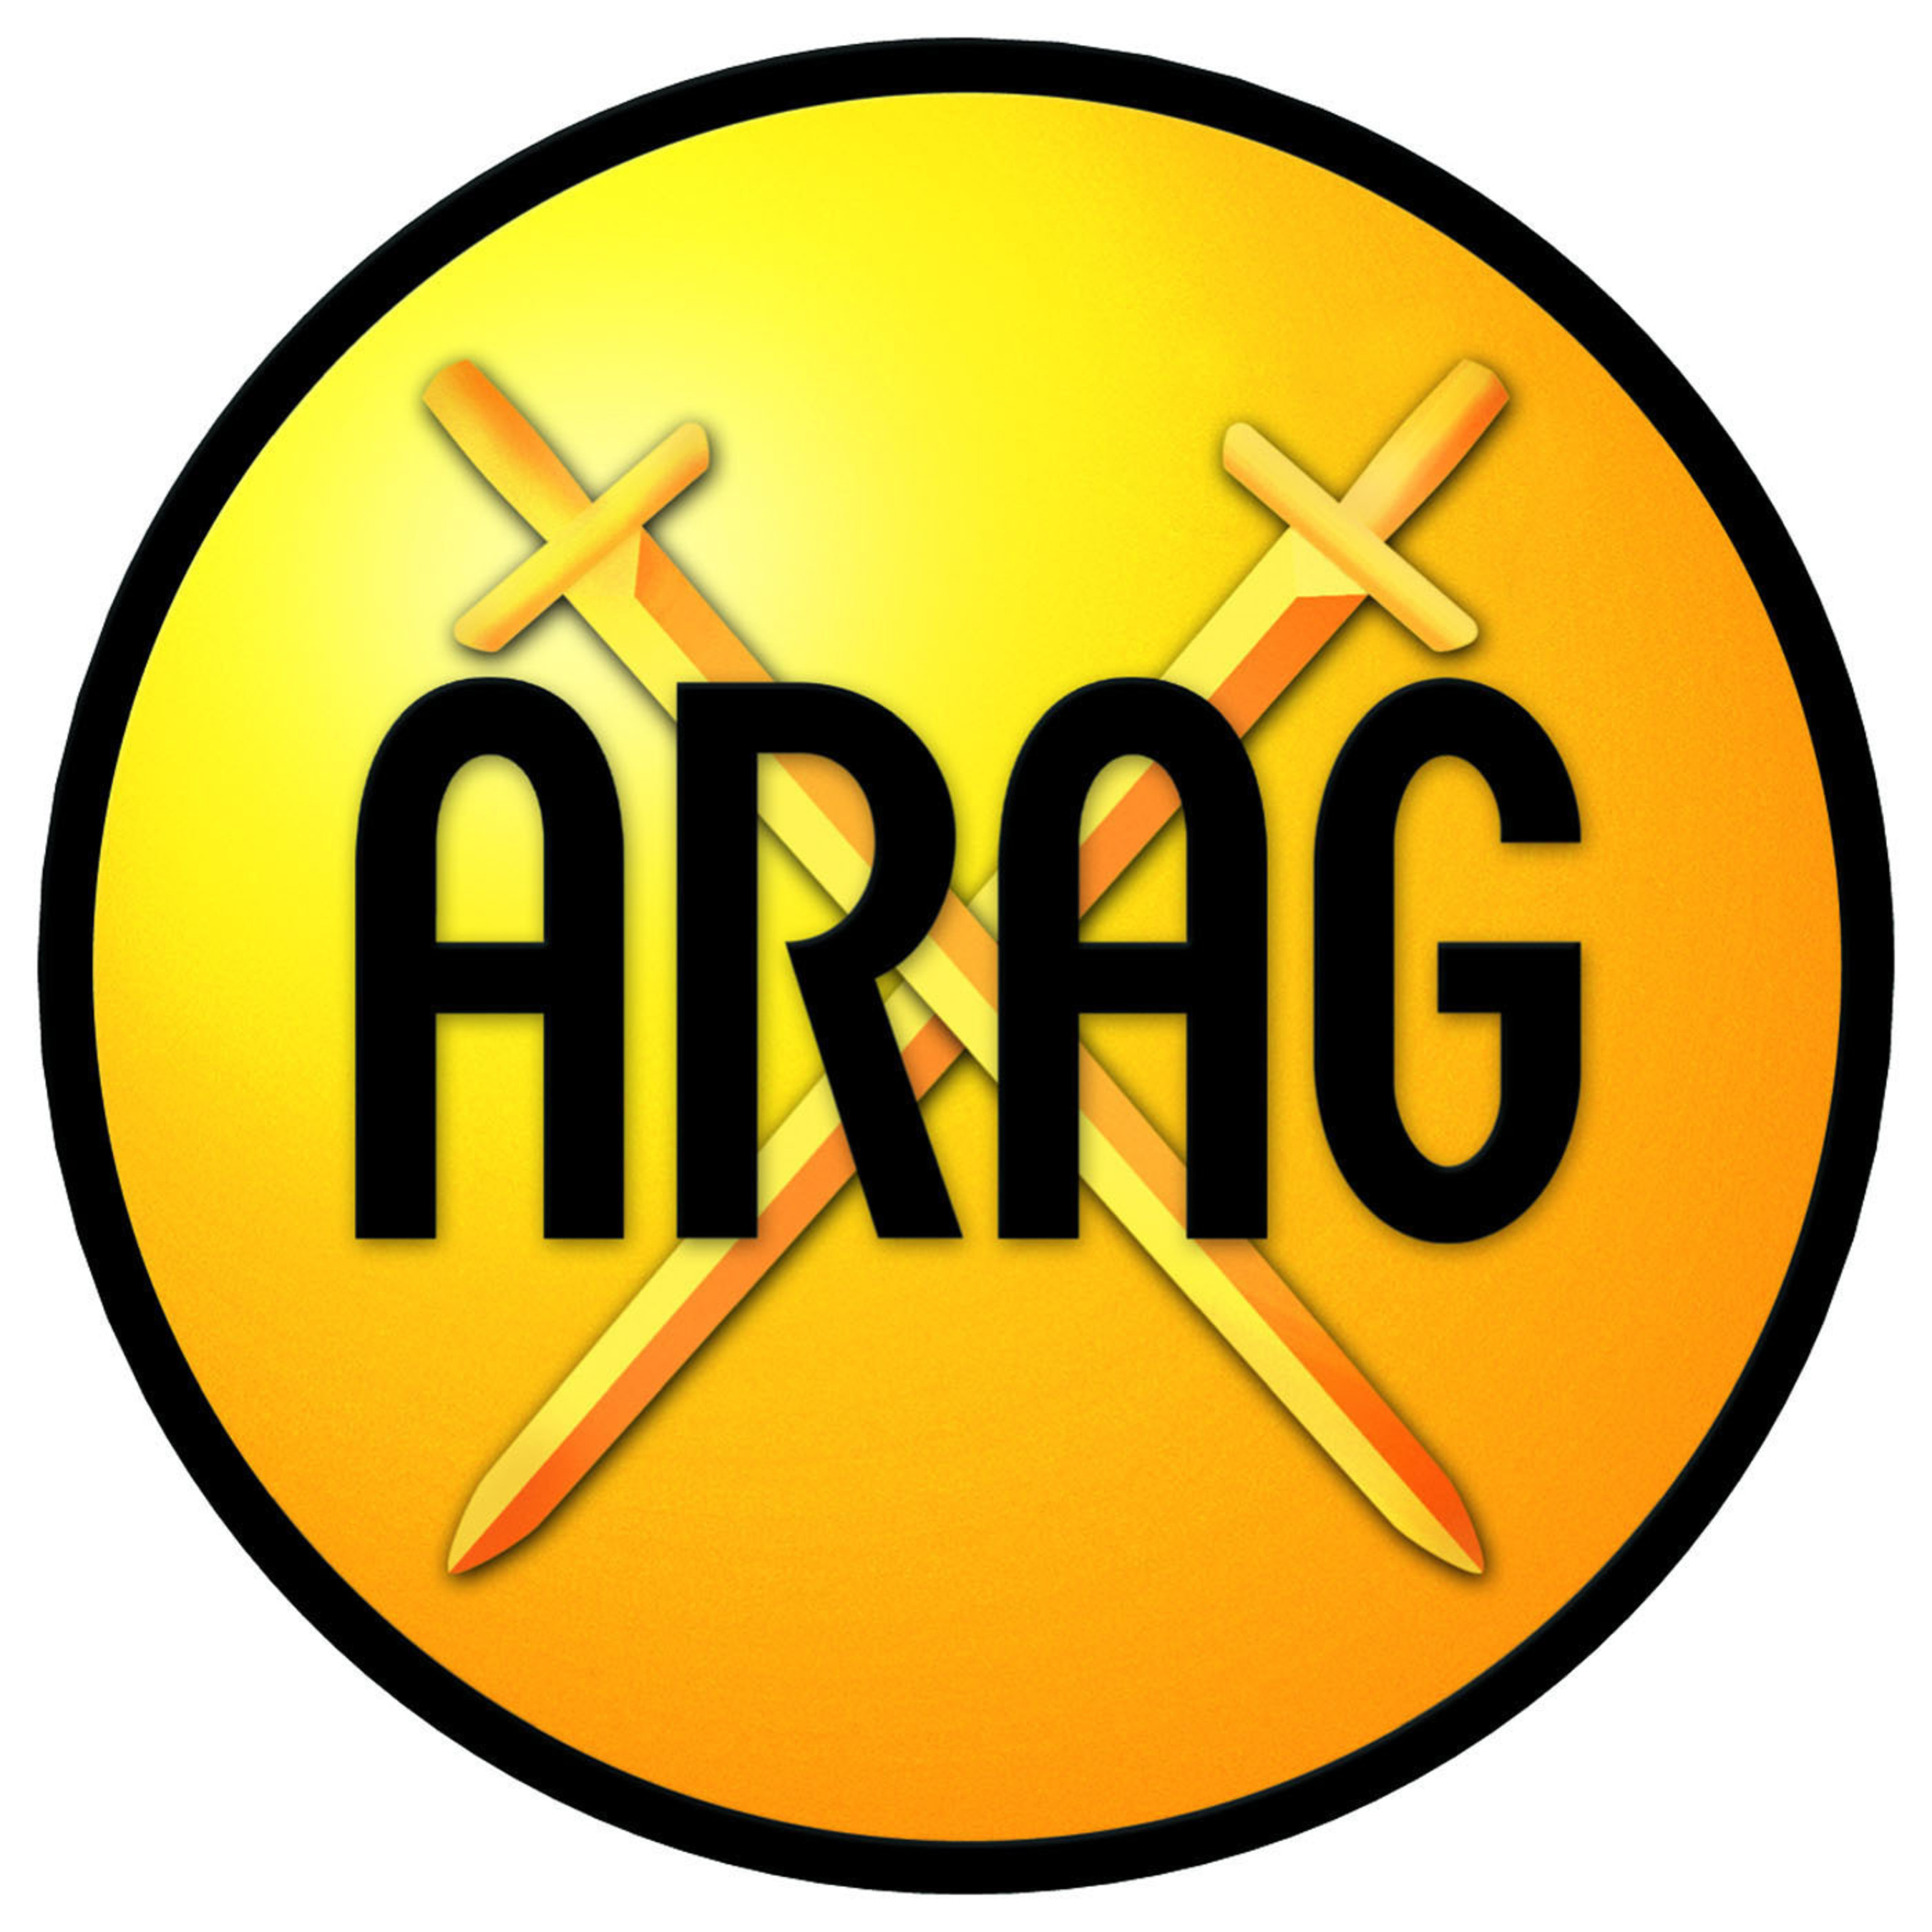 ARAG is a global provider of legal solutions